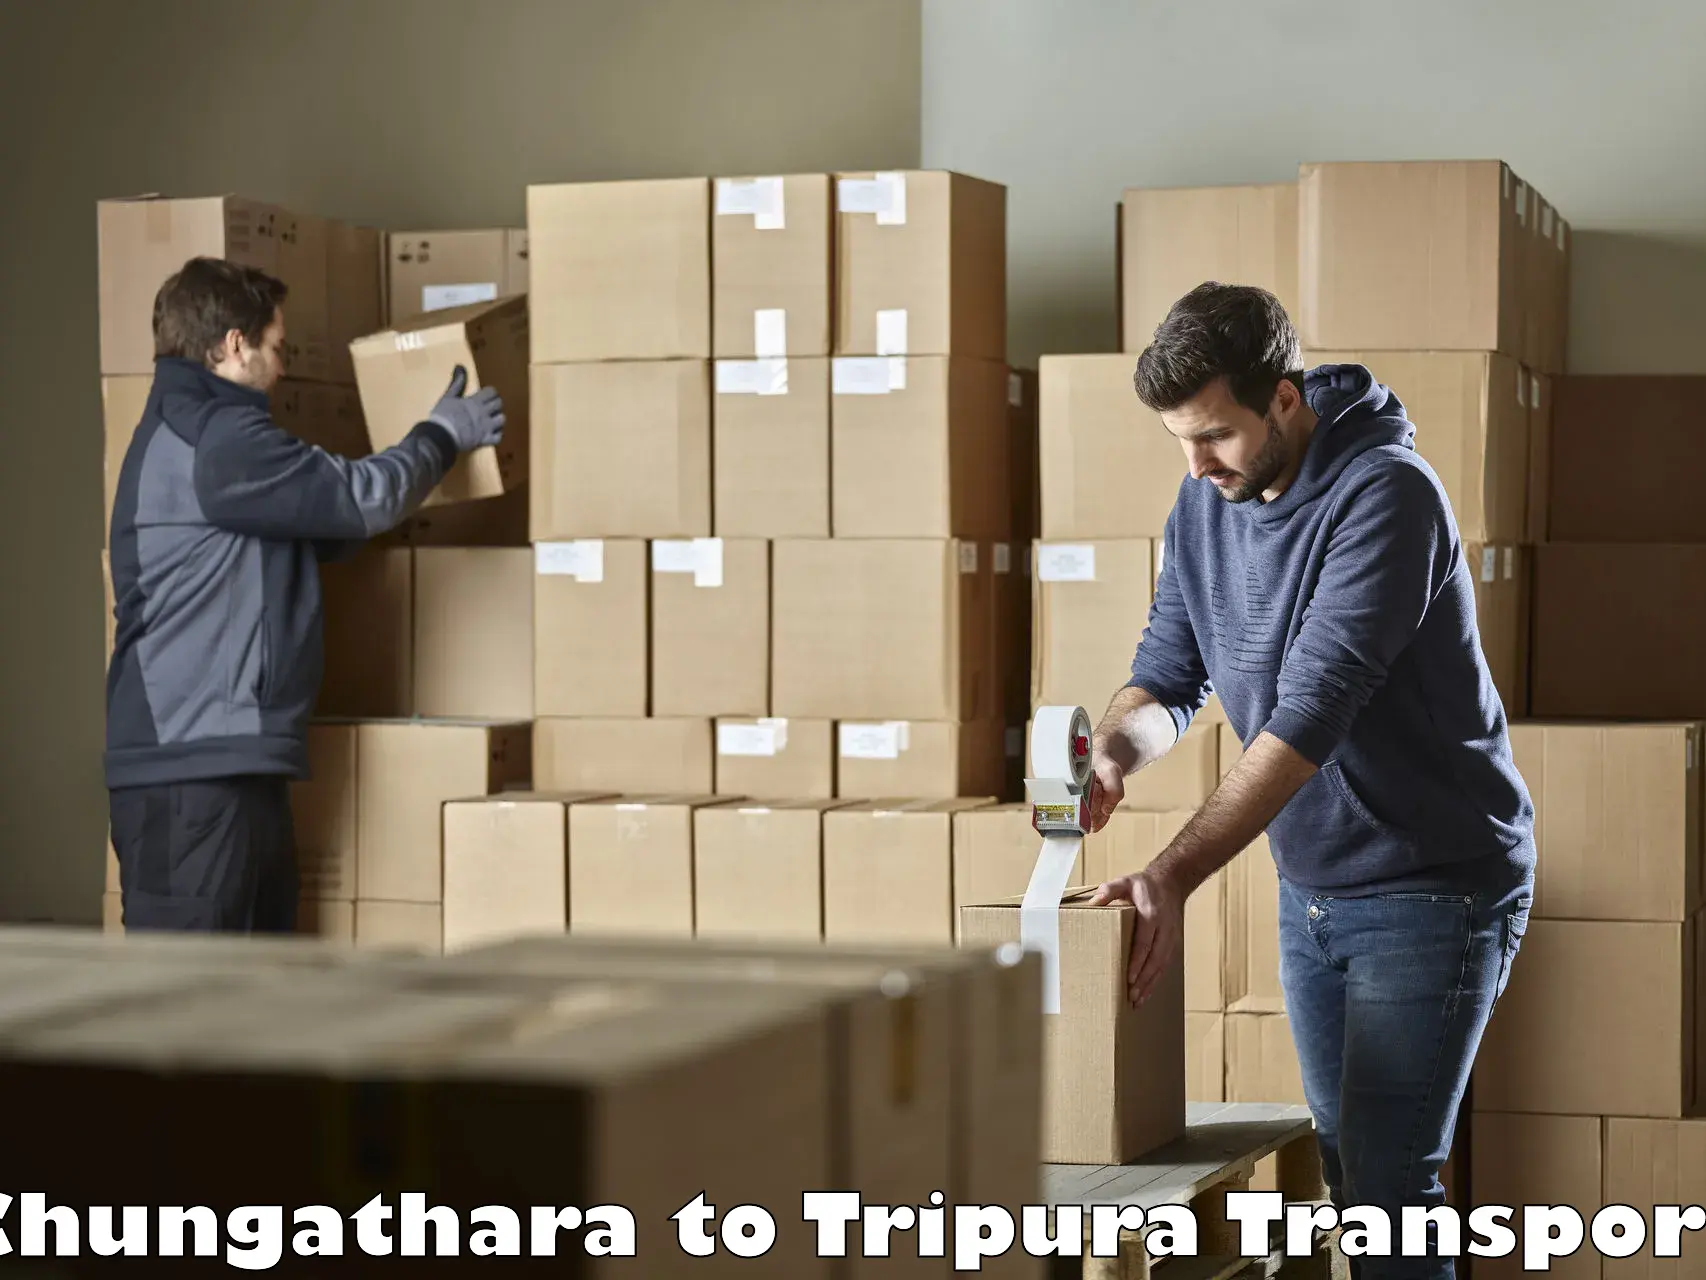 Best transport services in India Chungathara to Udaipur Tripura